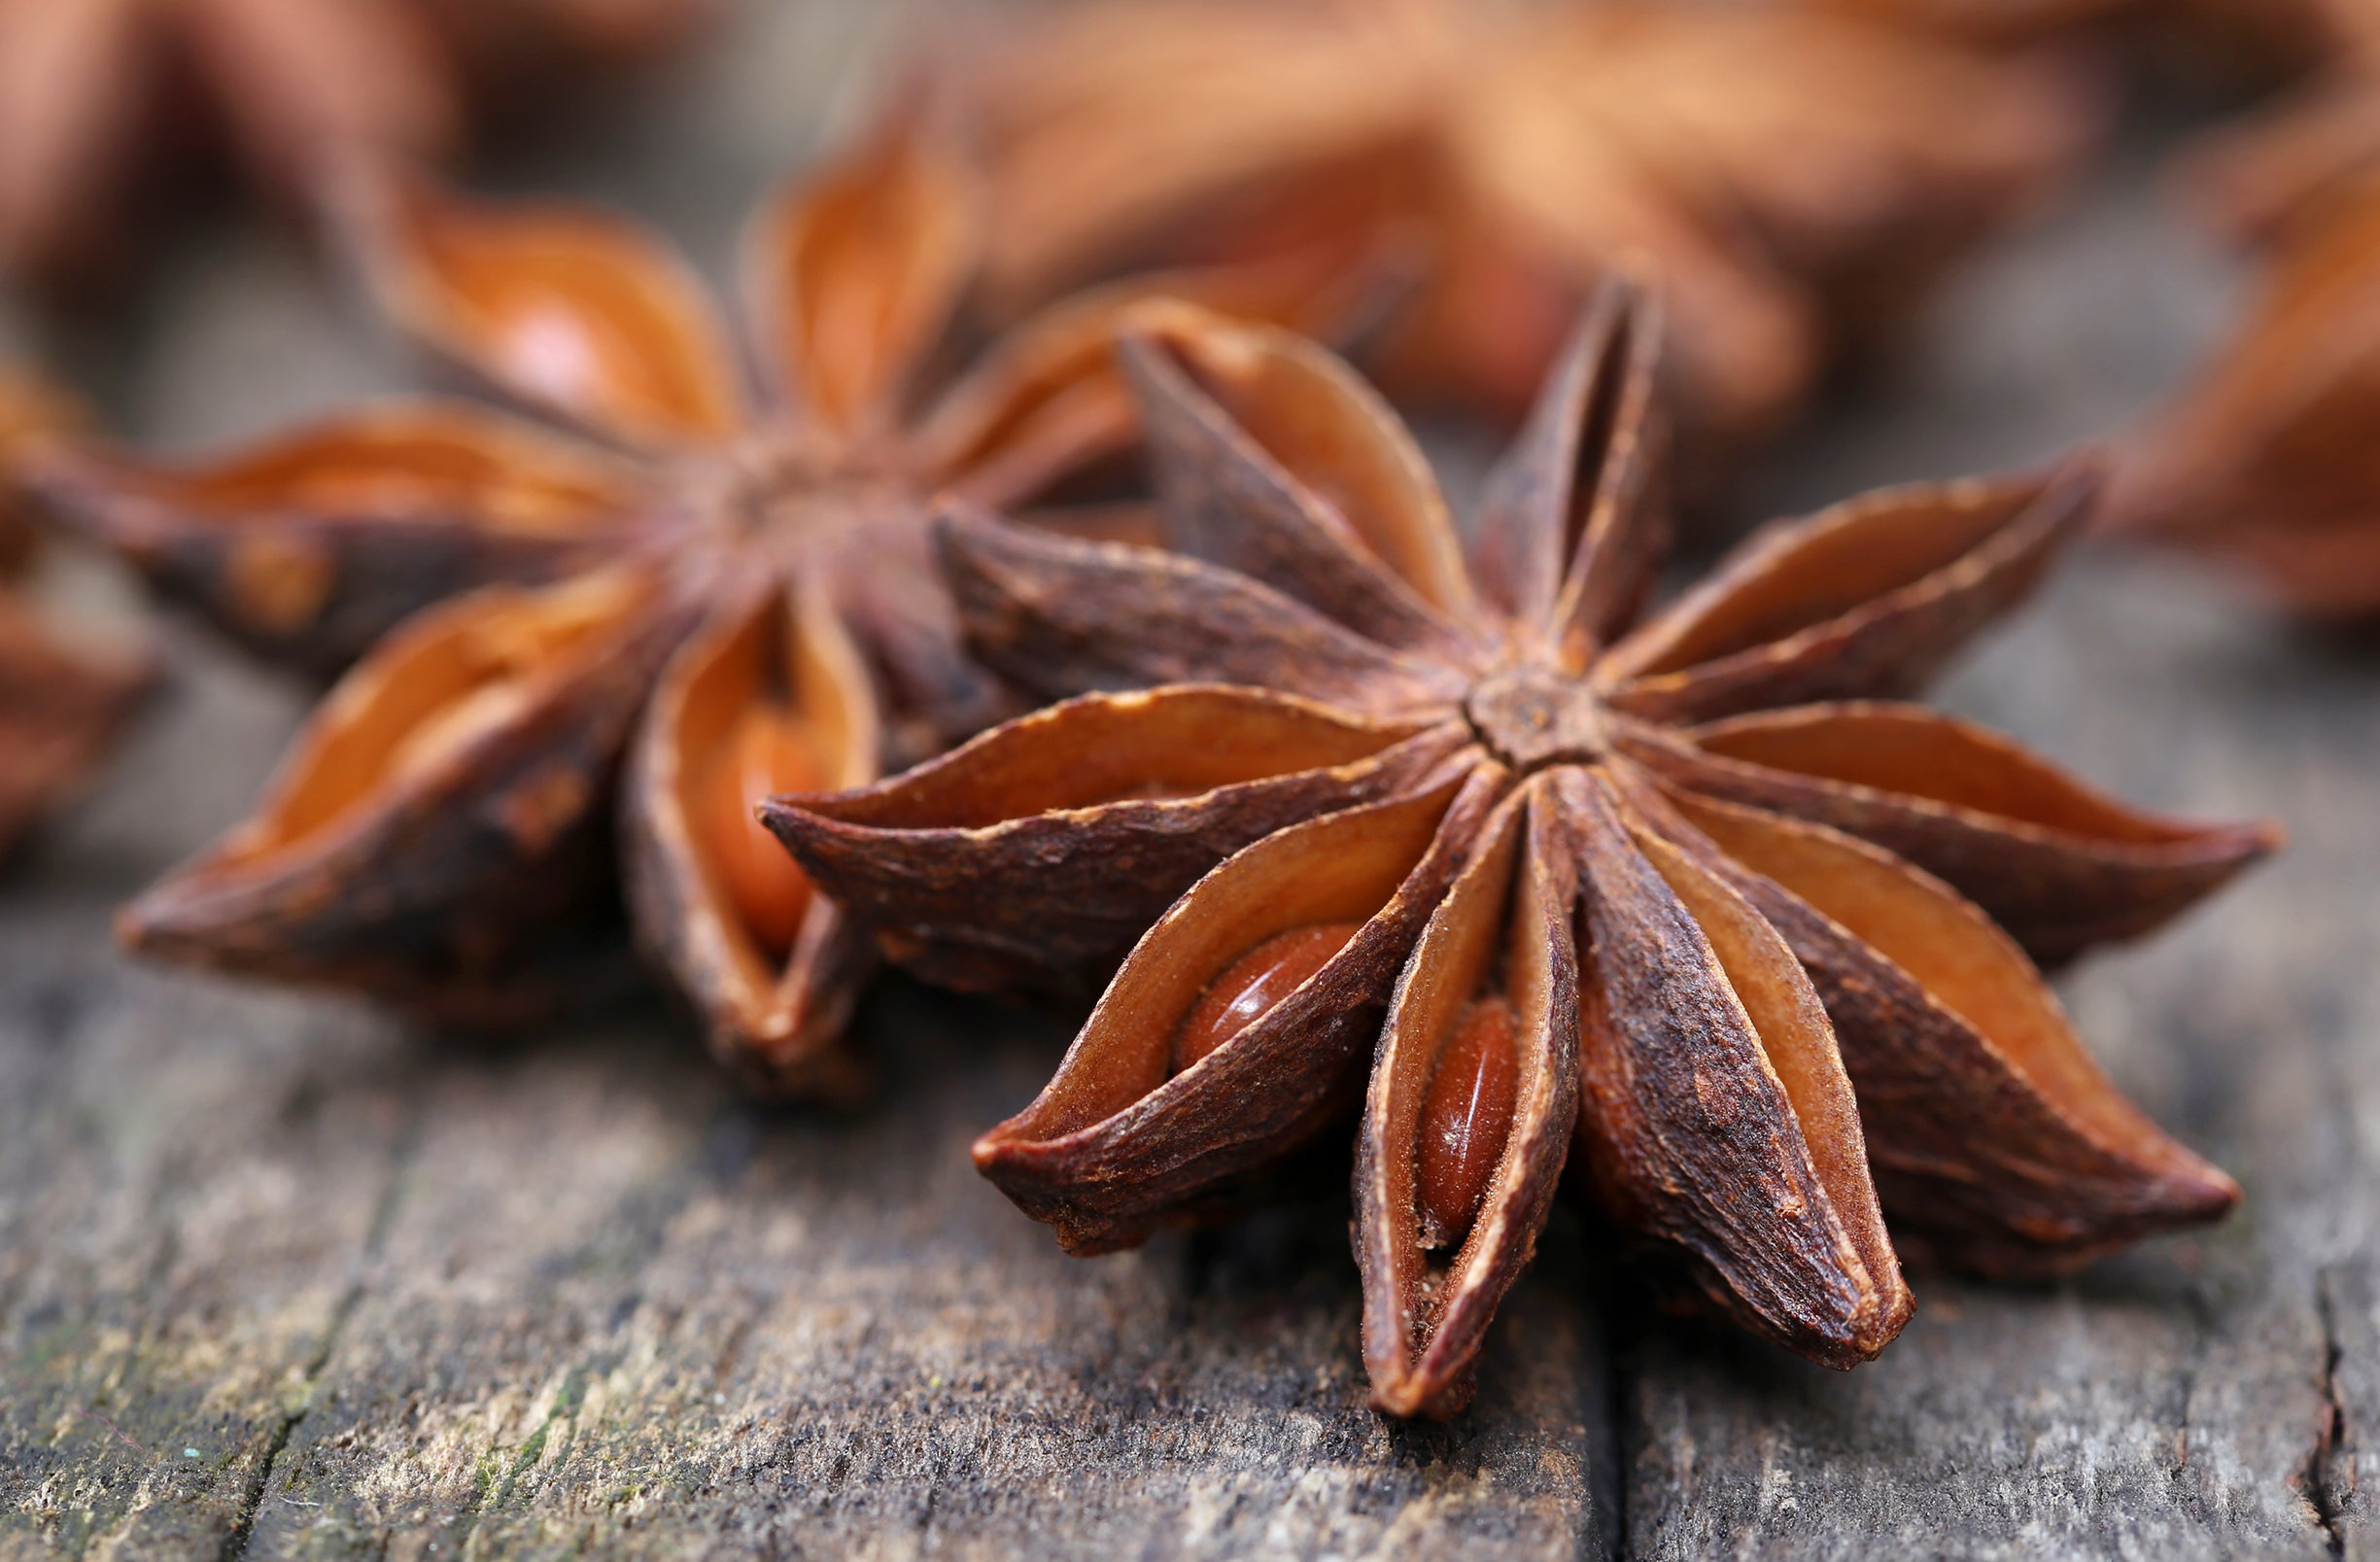 Star anise spice used in Kekoa Foods baby pouches.